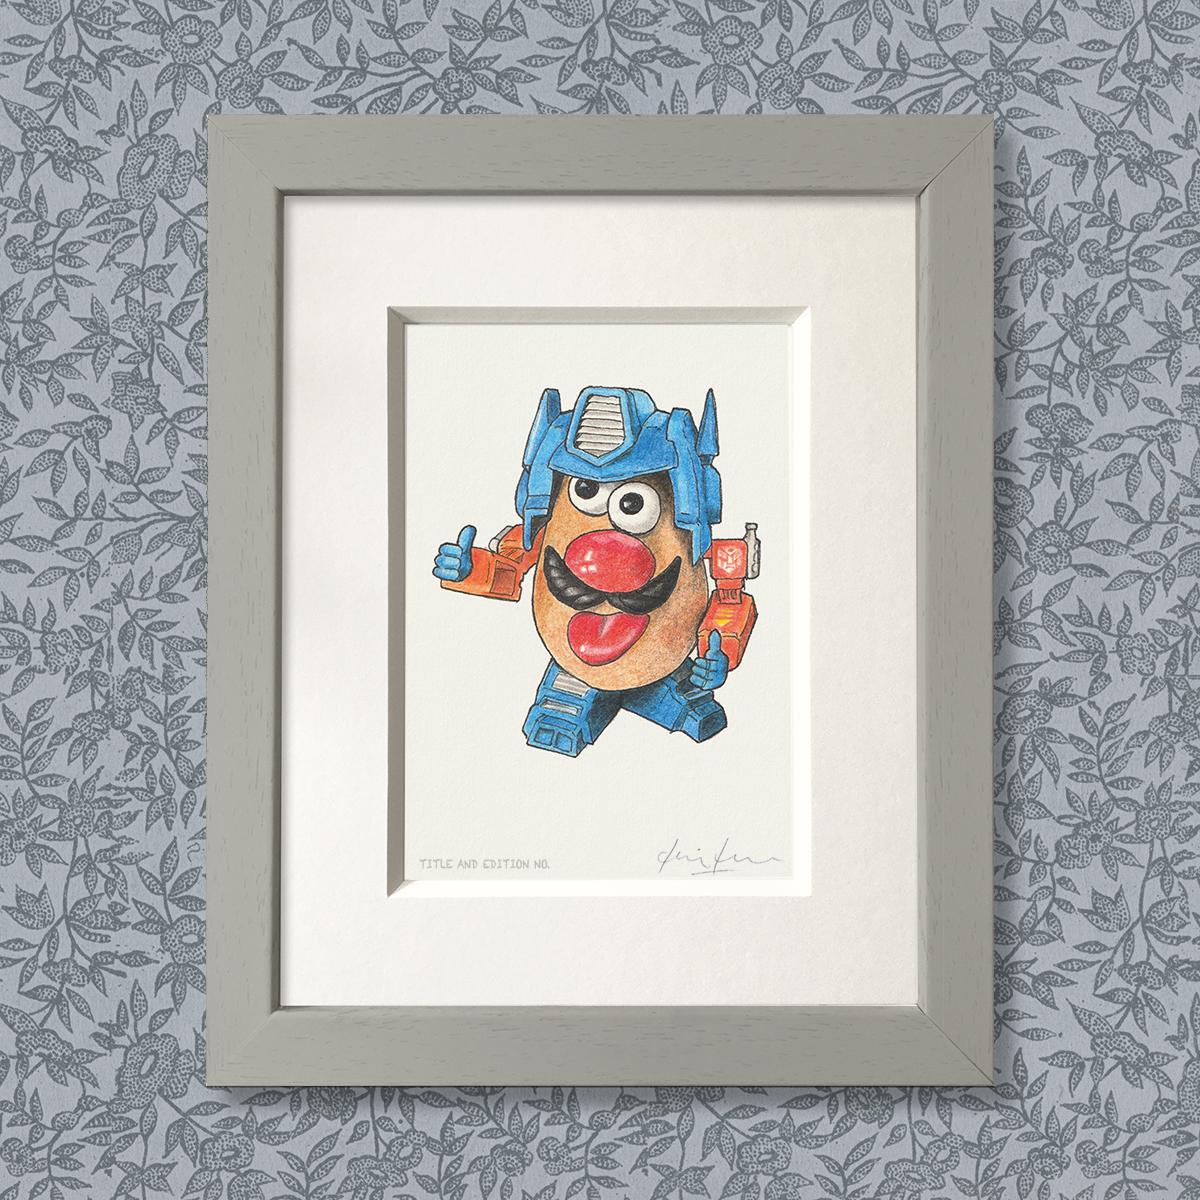 Limited edition print from a pen, ink and coloured pencil drawing of the Mr Potatohead toy dressed as Optimus Prime in a grey frame